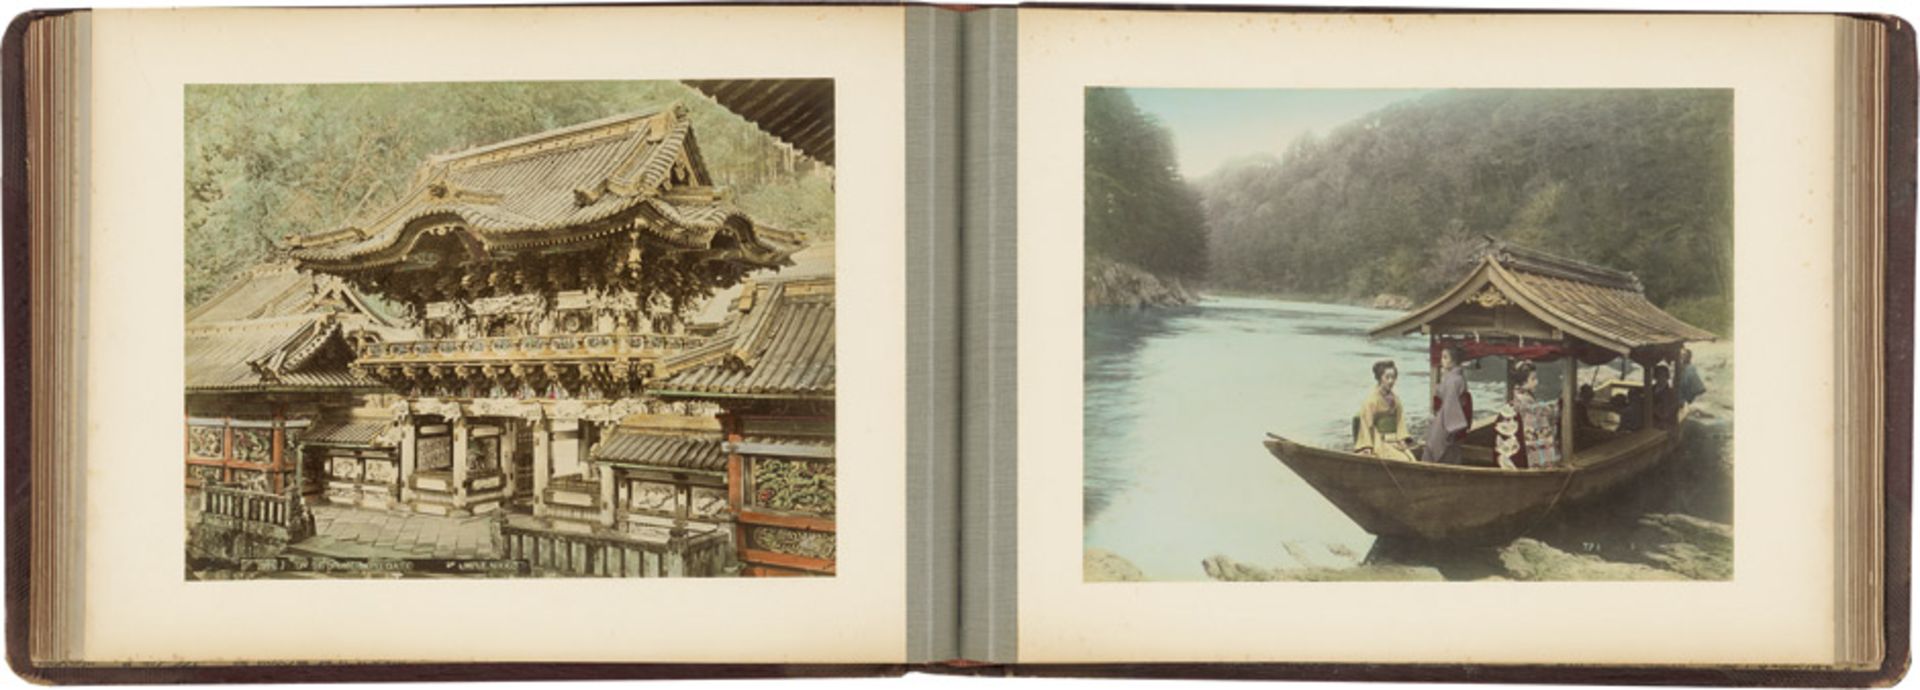 Japan: Views of landscapes, people and temples of JapanPhotographer: possibly Kusakabe Kimbei (